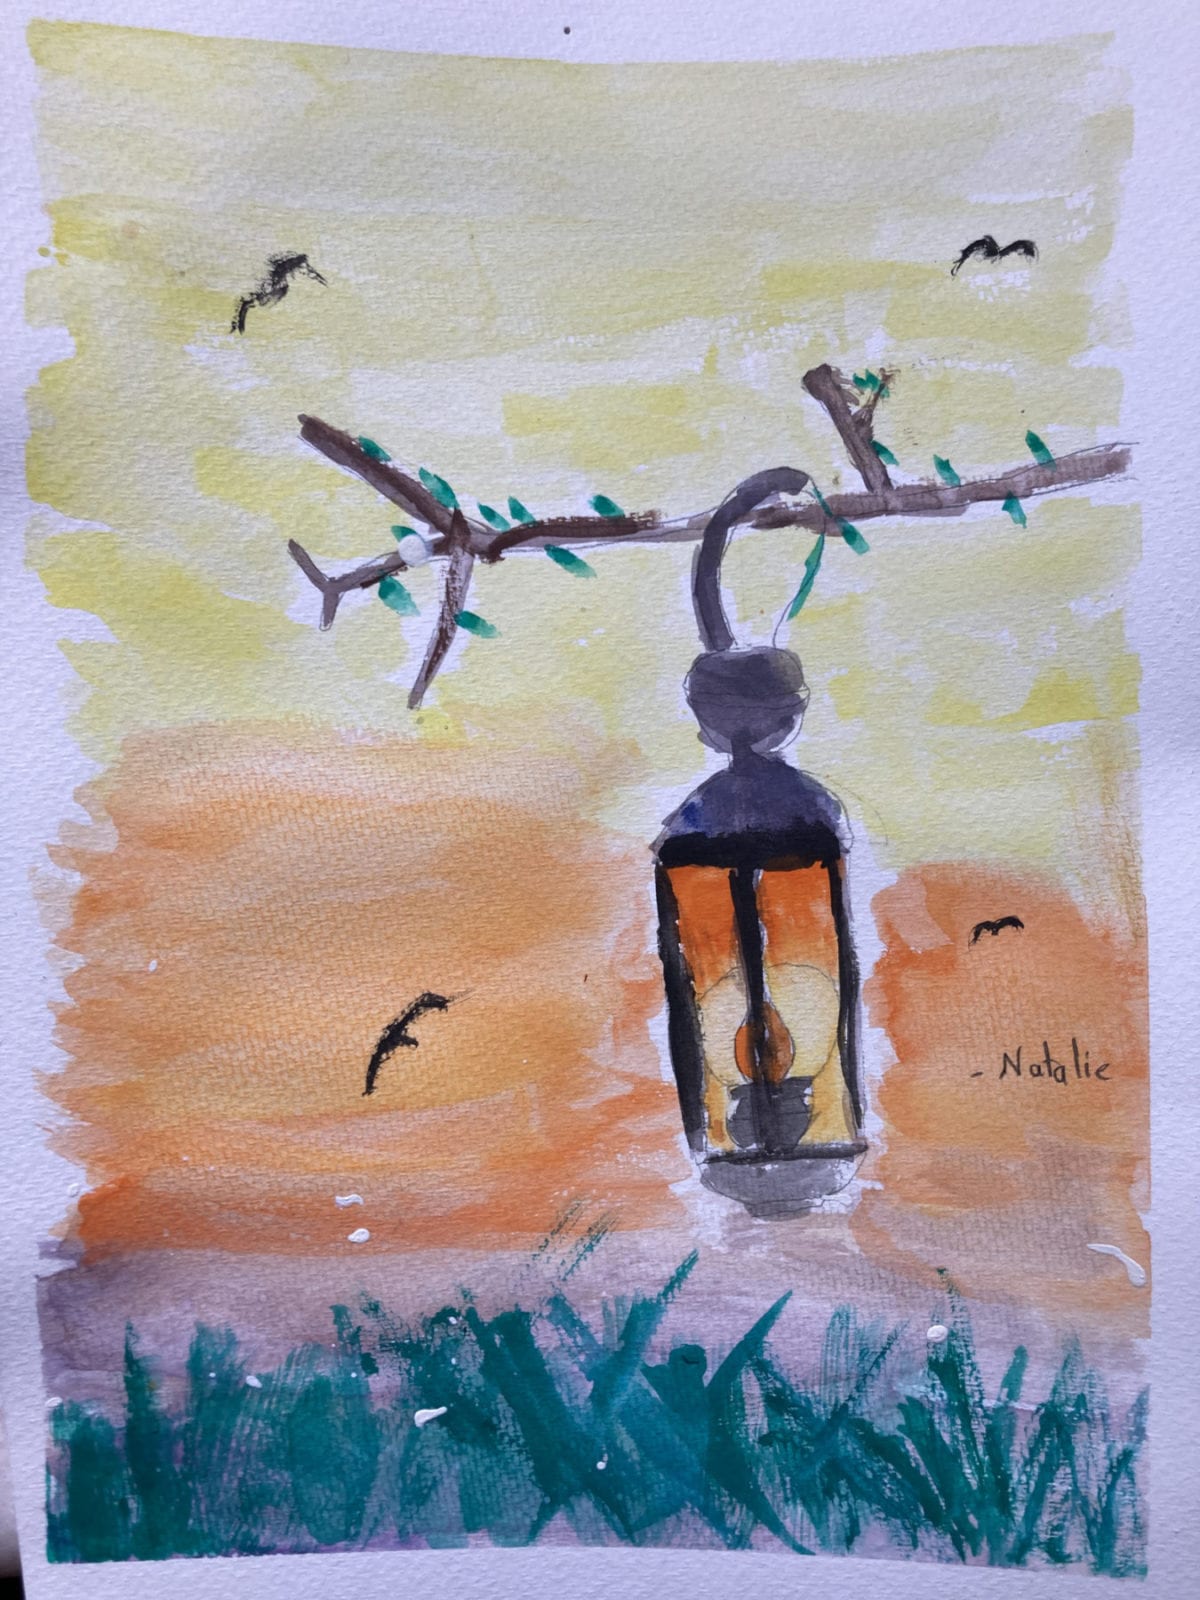 Natalie Braynor, The Lantern of Sunset, watercolor, 9 x 12